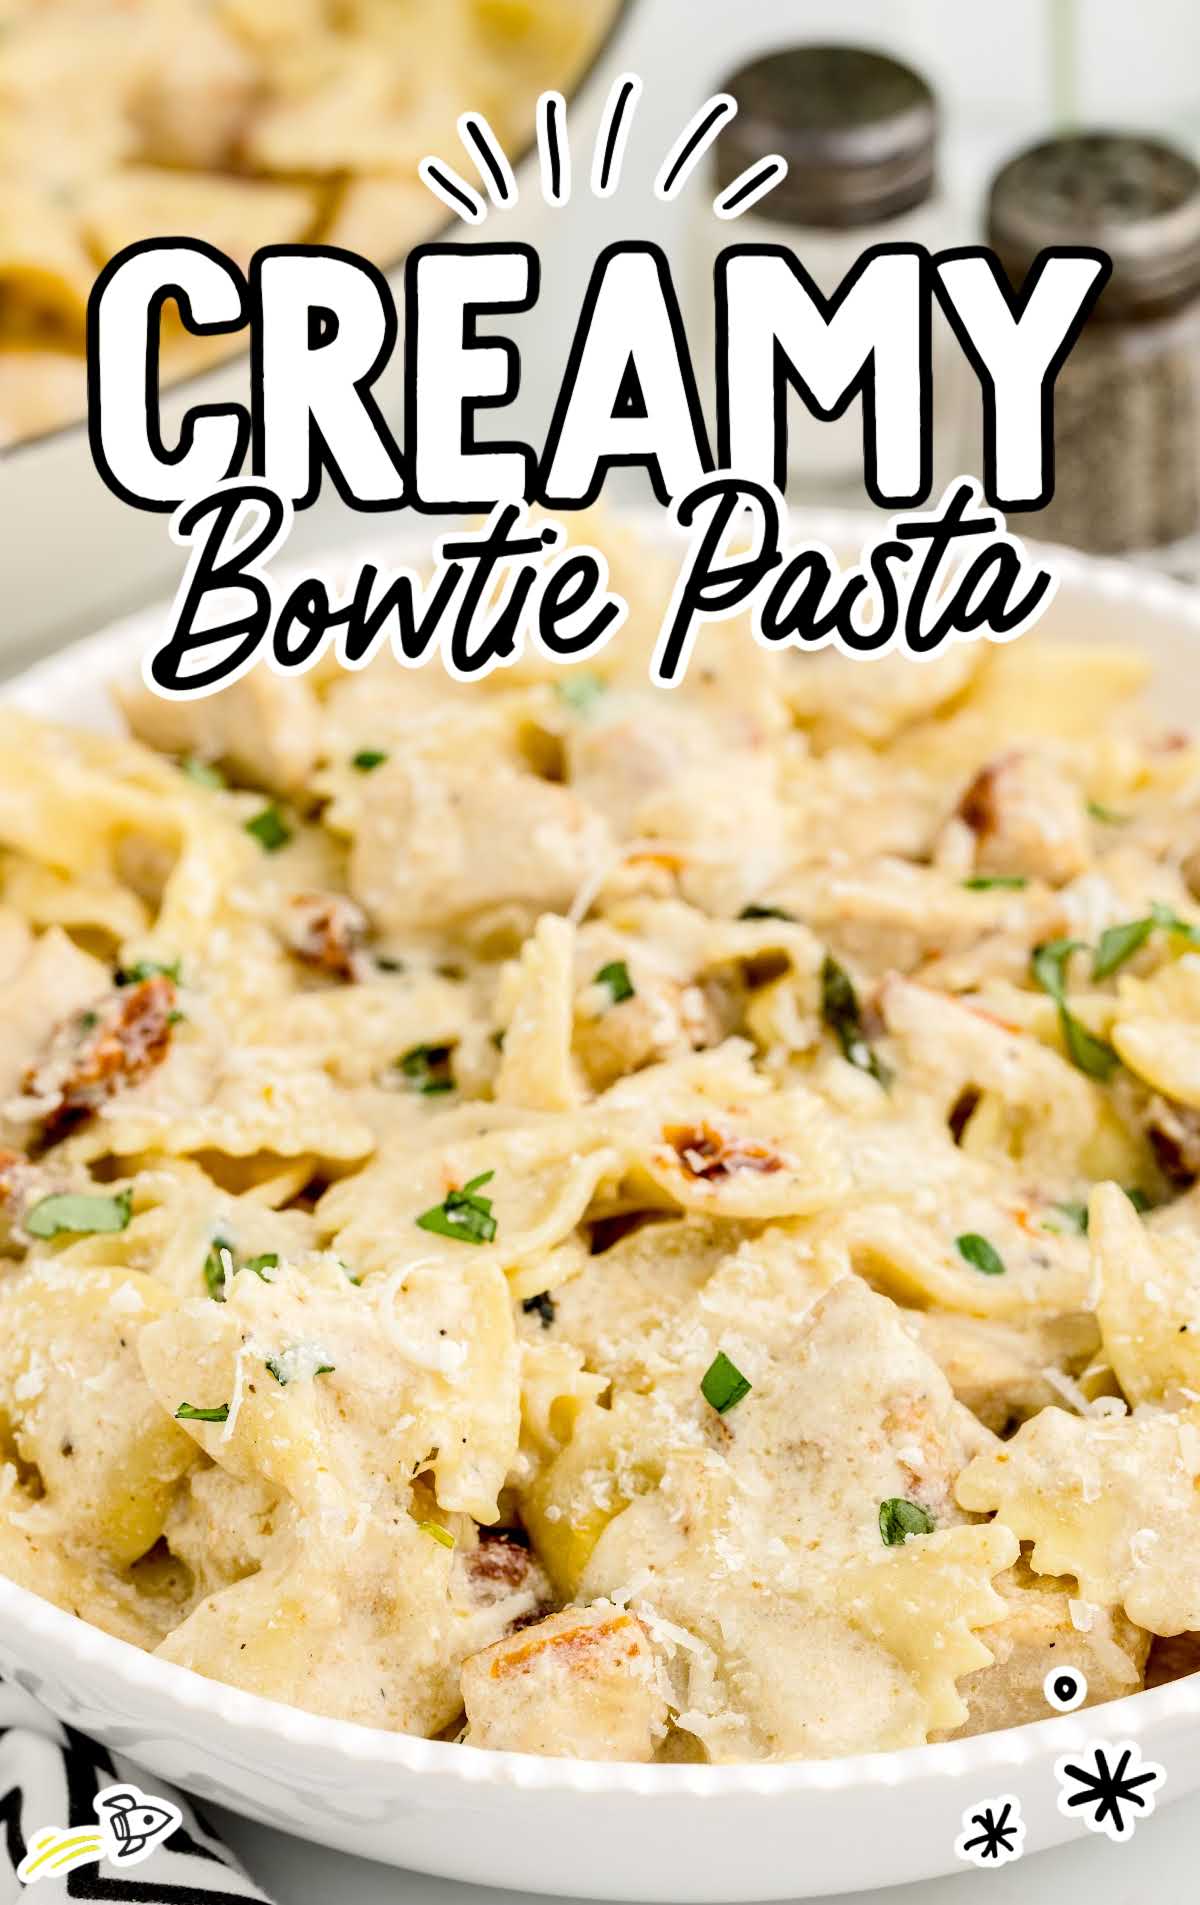 close up shot of Creamy Bowtie Pasta on a plate